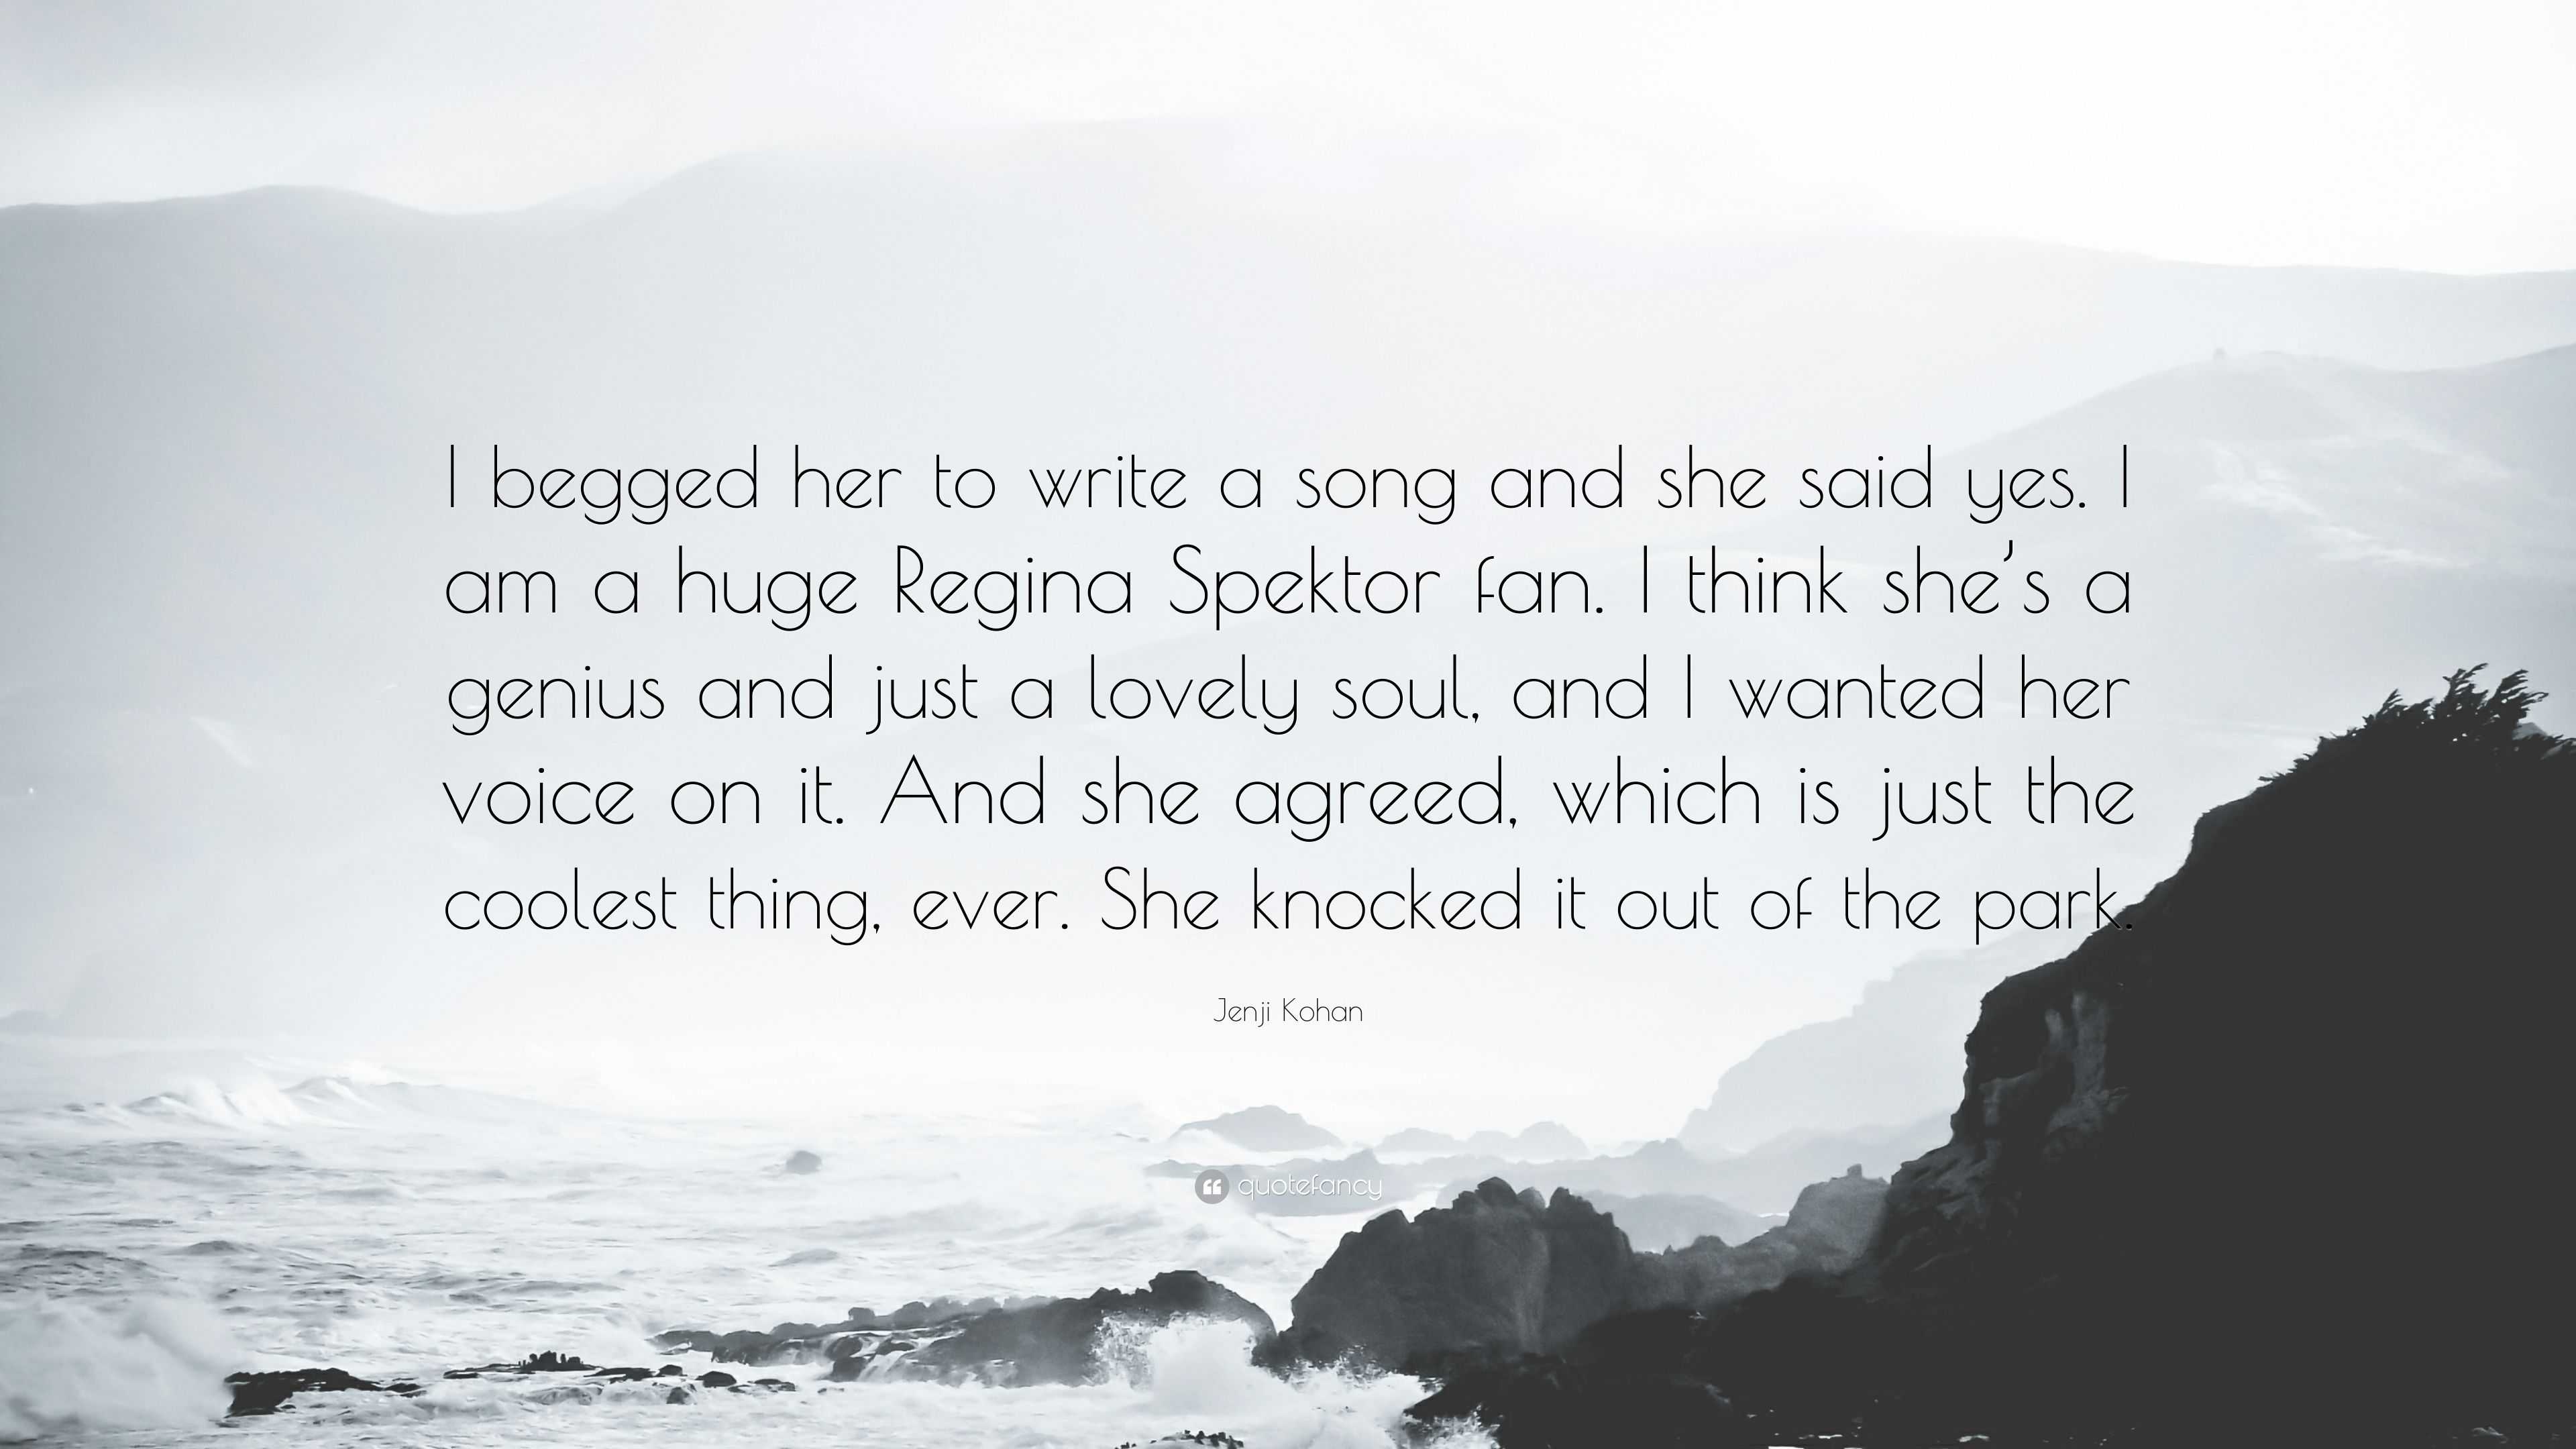 Jenji Kohan Quote: “I begged her to write a song and she said yes